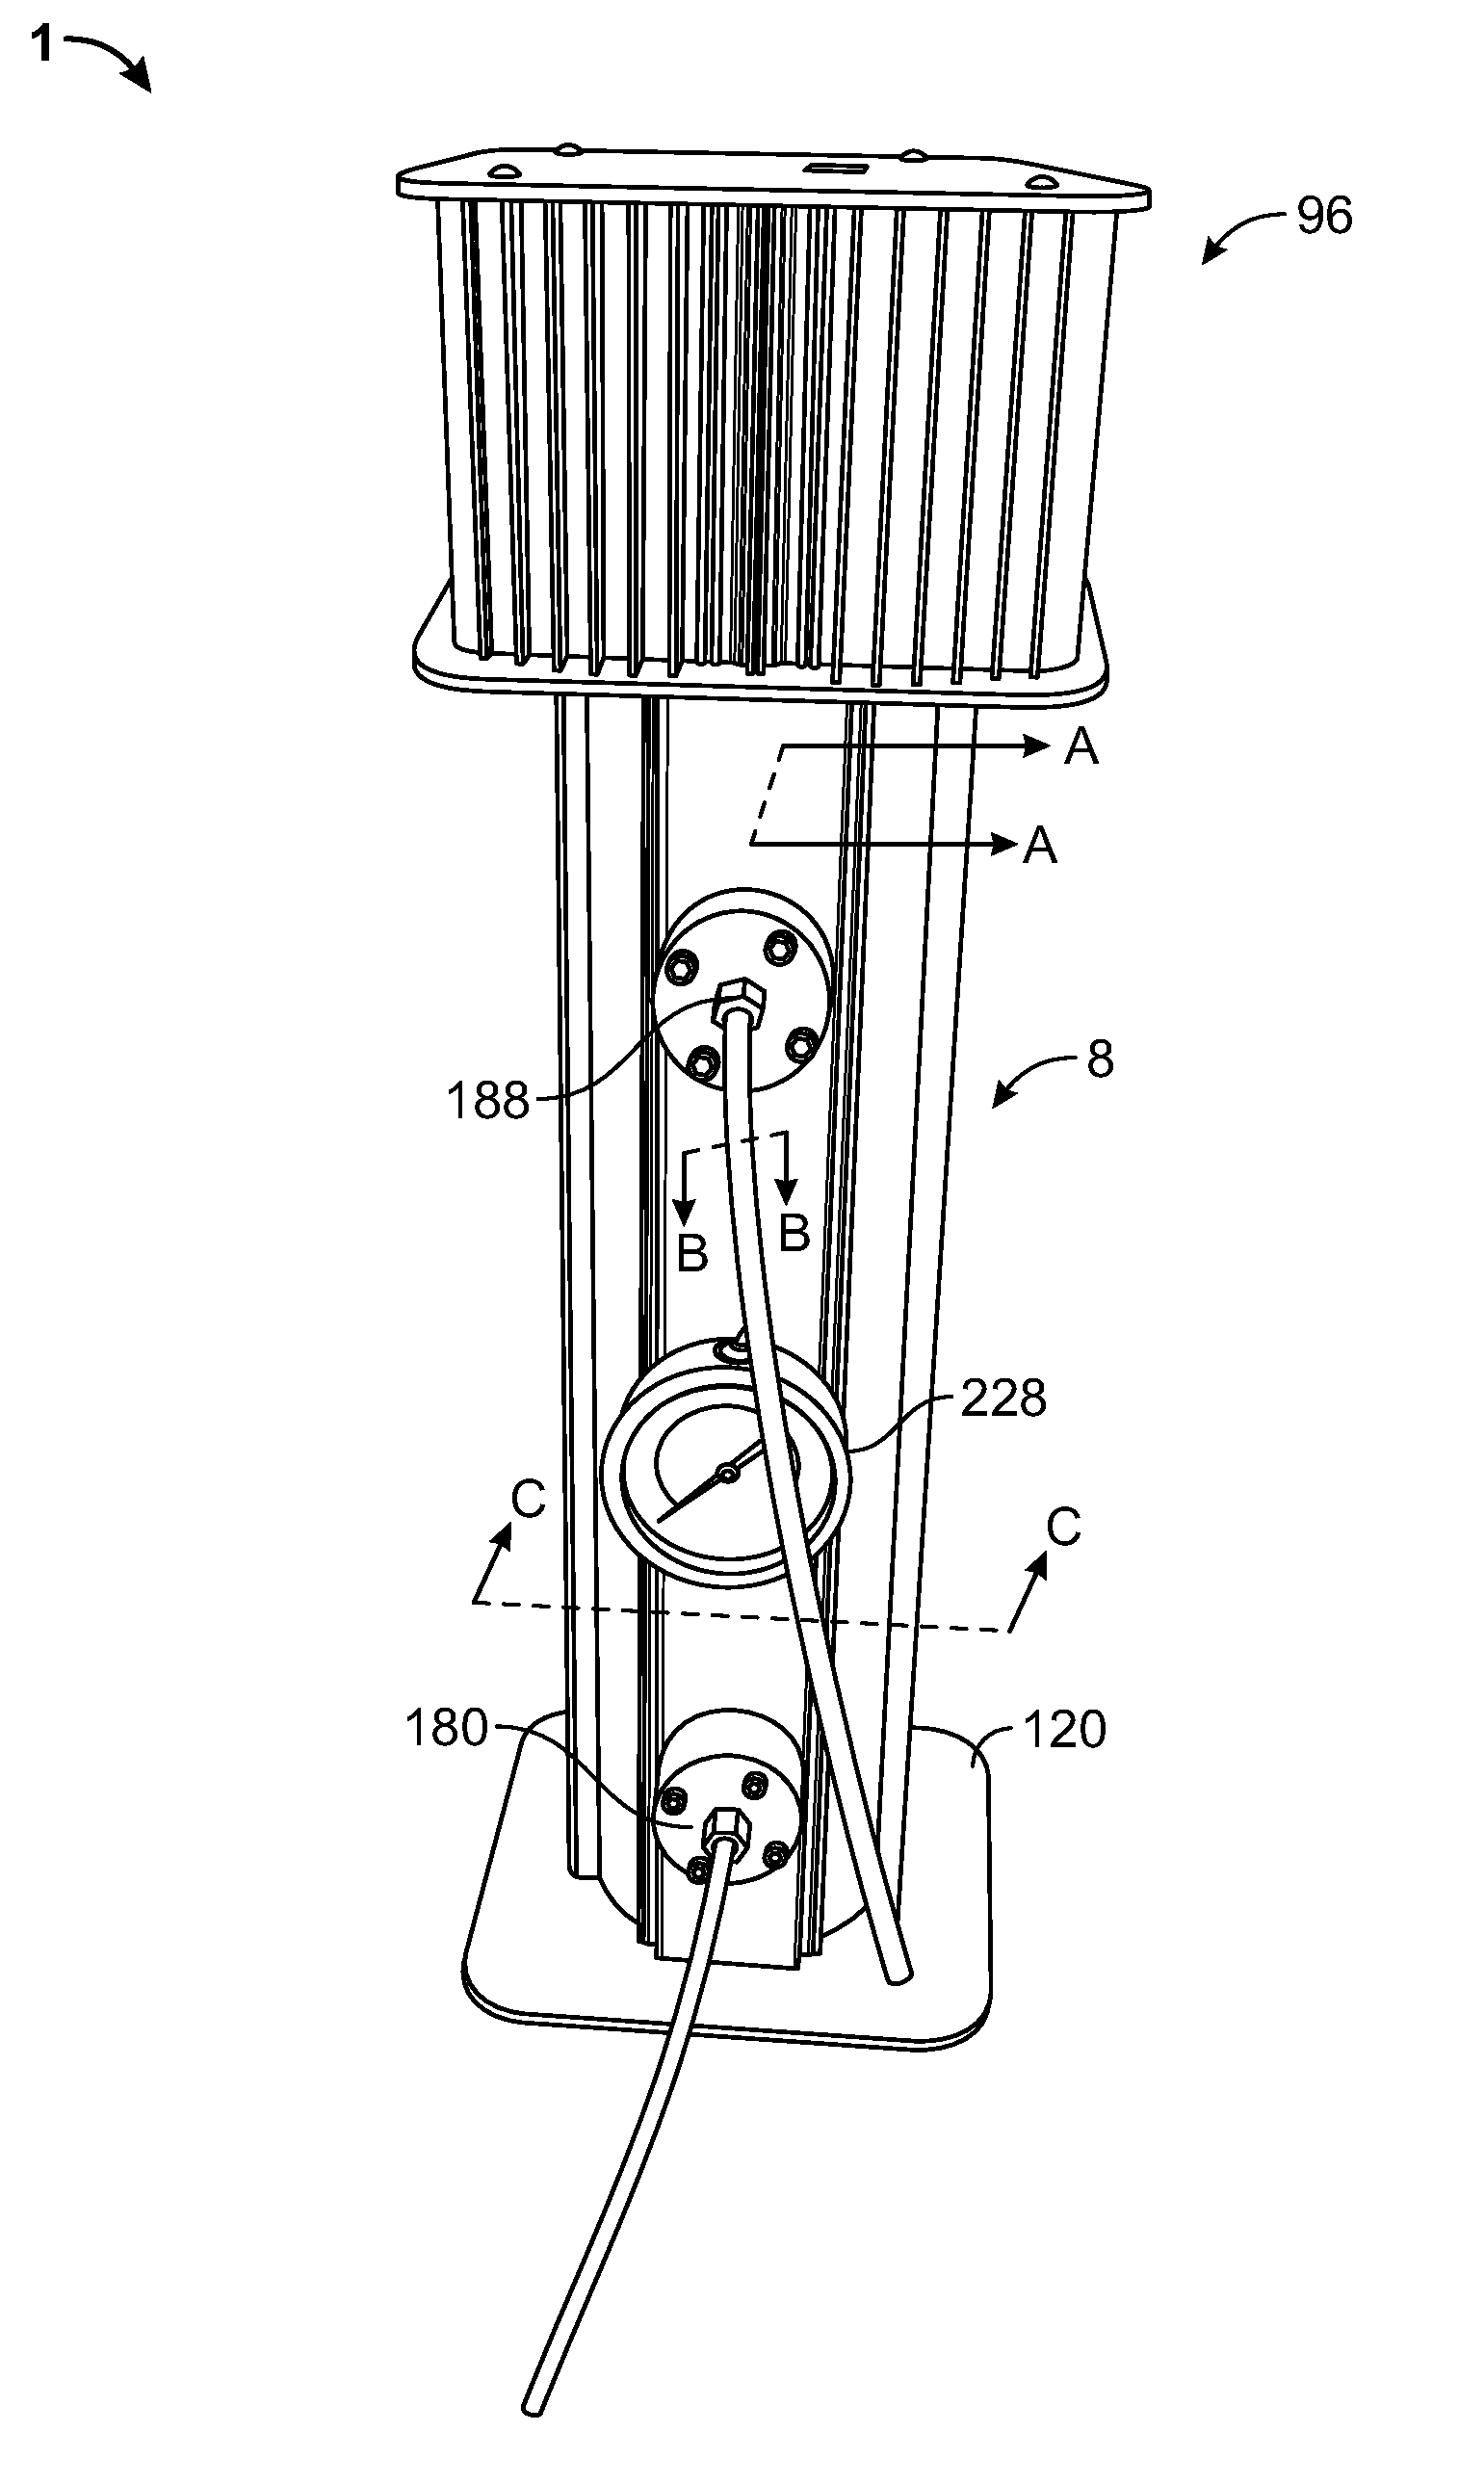 Device and method for sanitizing gas and water